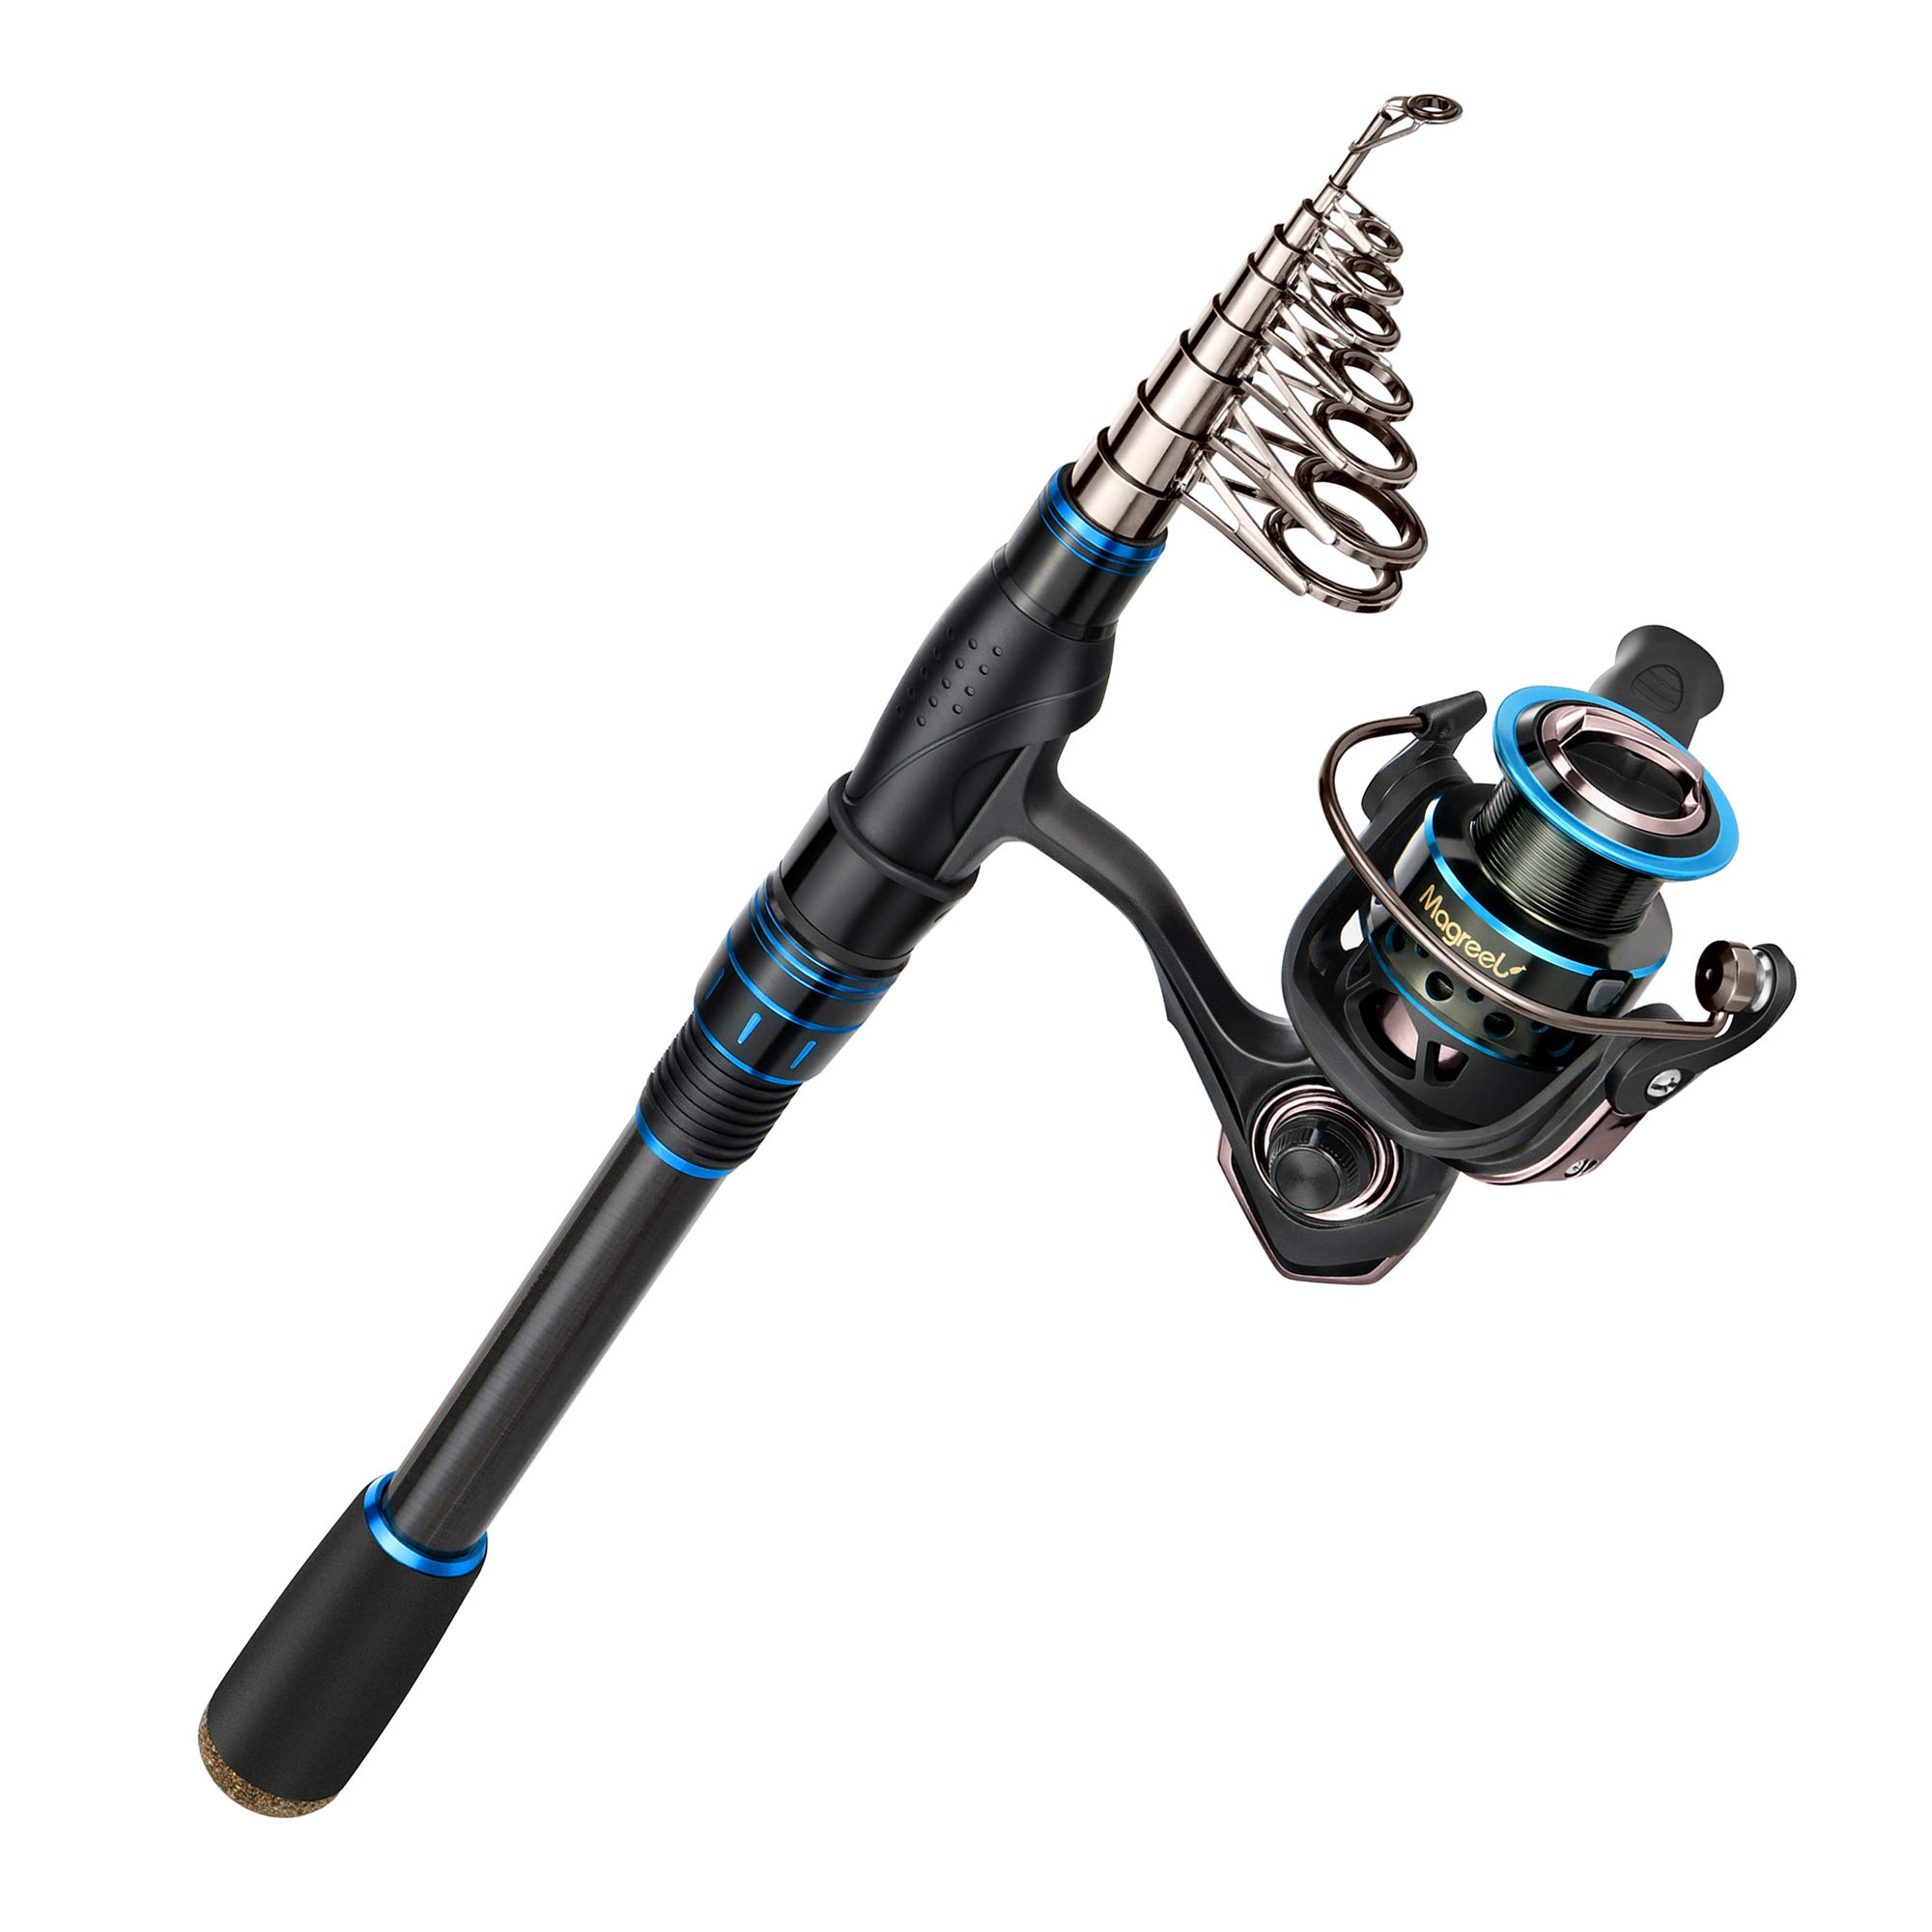  Freshwater Fishing Poles And Reels Combo